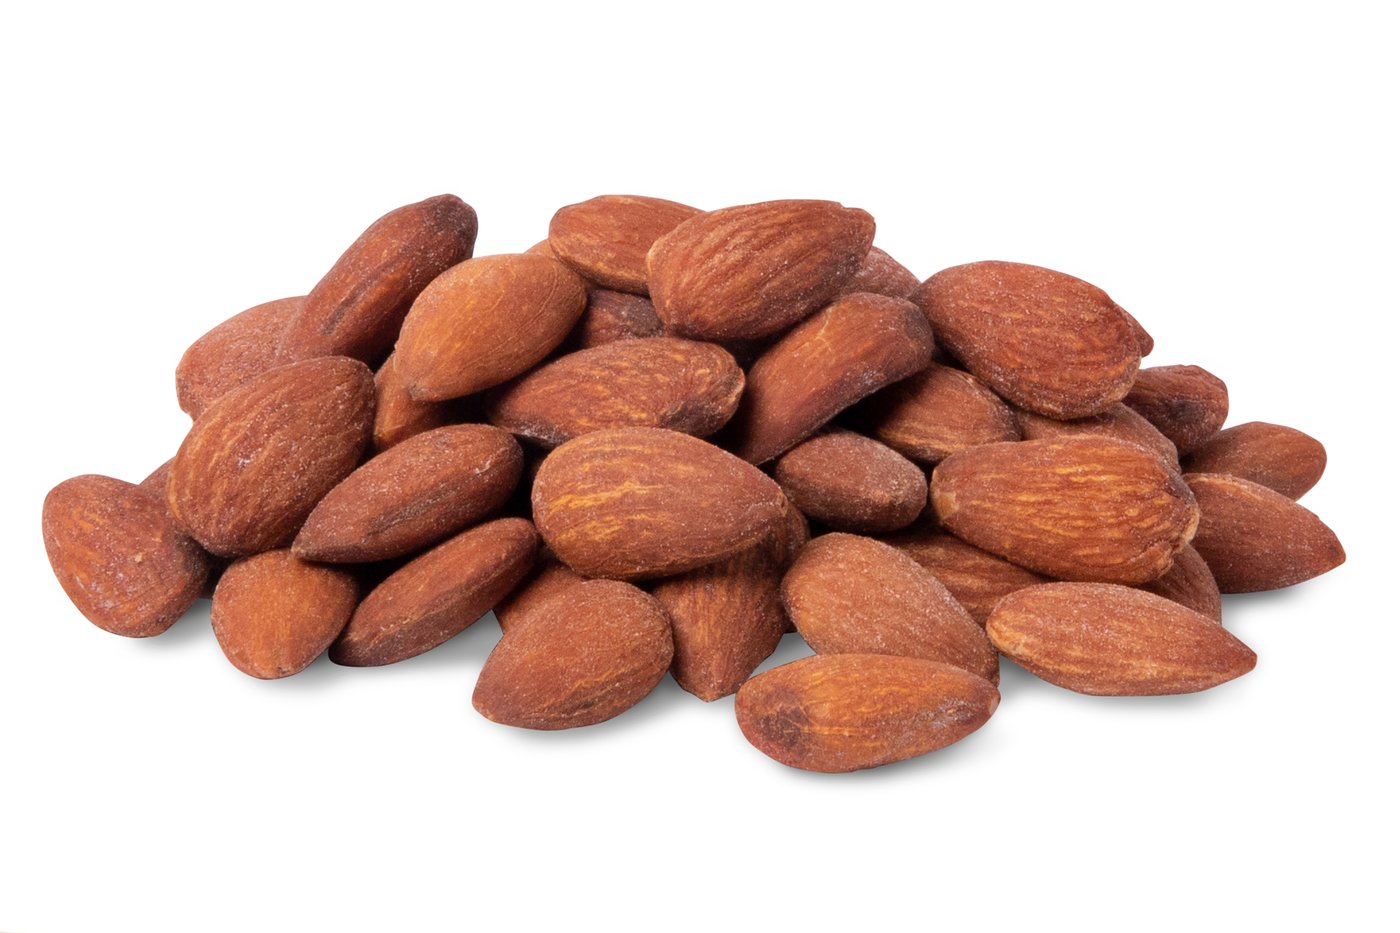 Roasted Almonds (Salted) image zoom